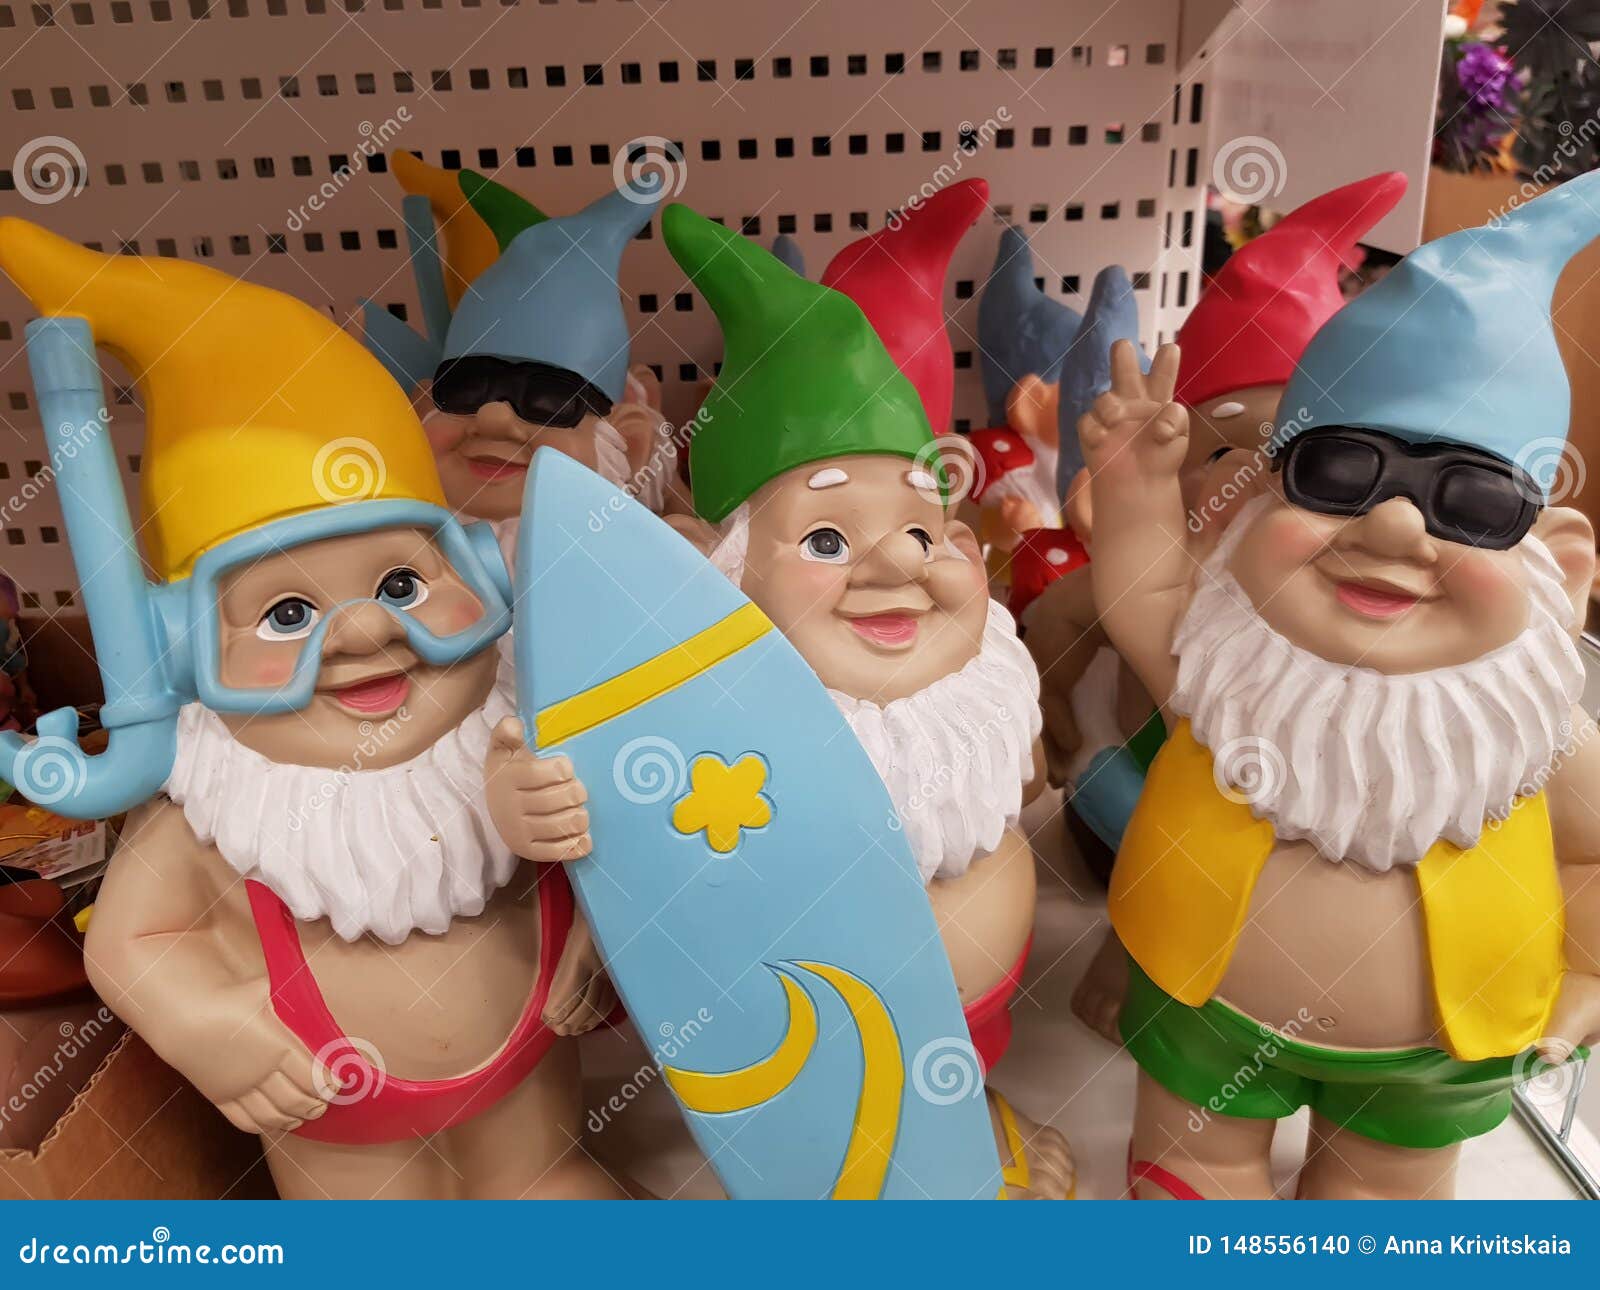 Funny Figures Of Garden Gnomes On Sale In The Store Stock Photo